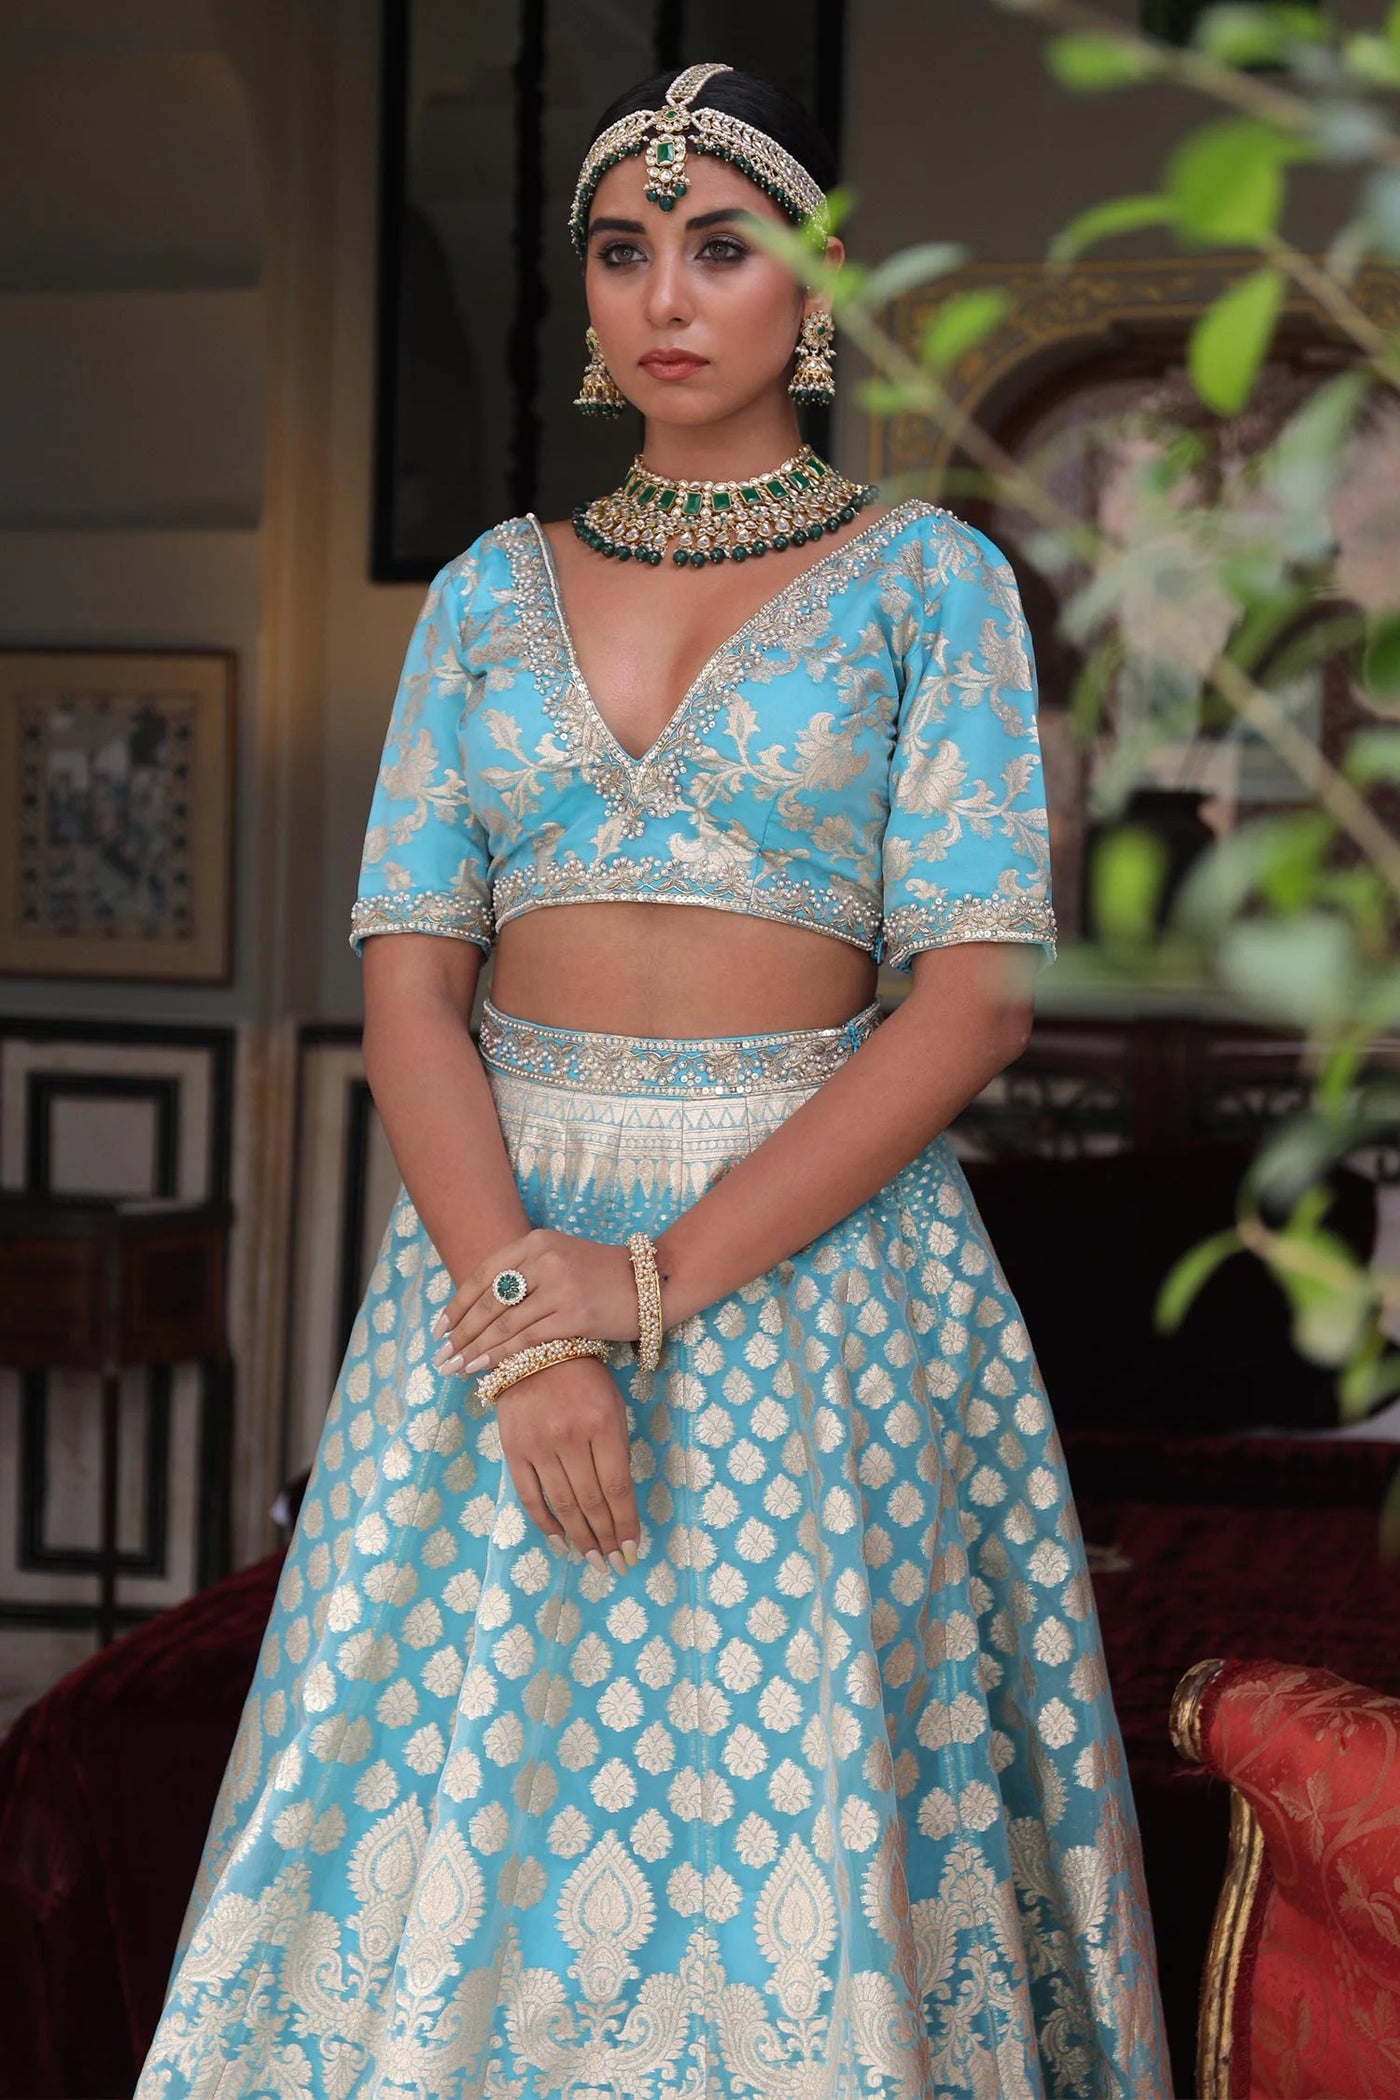 Blue Banarasi Lehenga Set - Indian Clothing in Denver, CO, Aurora, CO, Boulder, CO, Fort Collins, CO, Colorado Springs, CO, Parker, CO, Highlands Ranch, CO, Cherry Creek, CO, Centennial, CO, and Longmont, CO. Nationwide shipping USA - India Fashion X